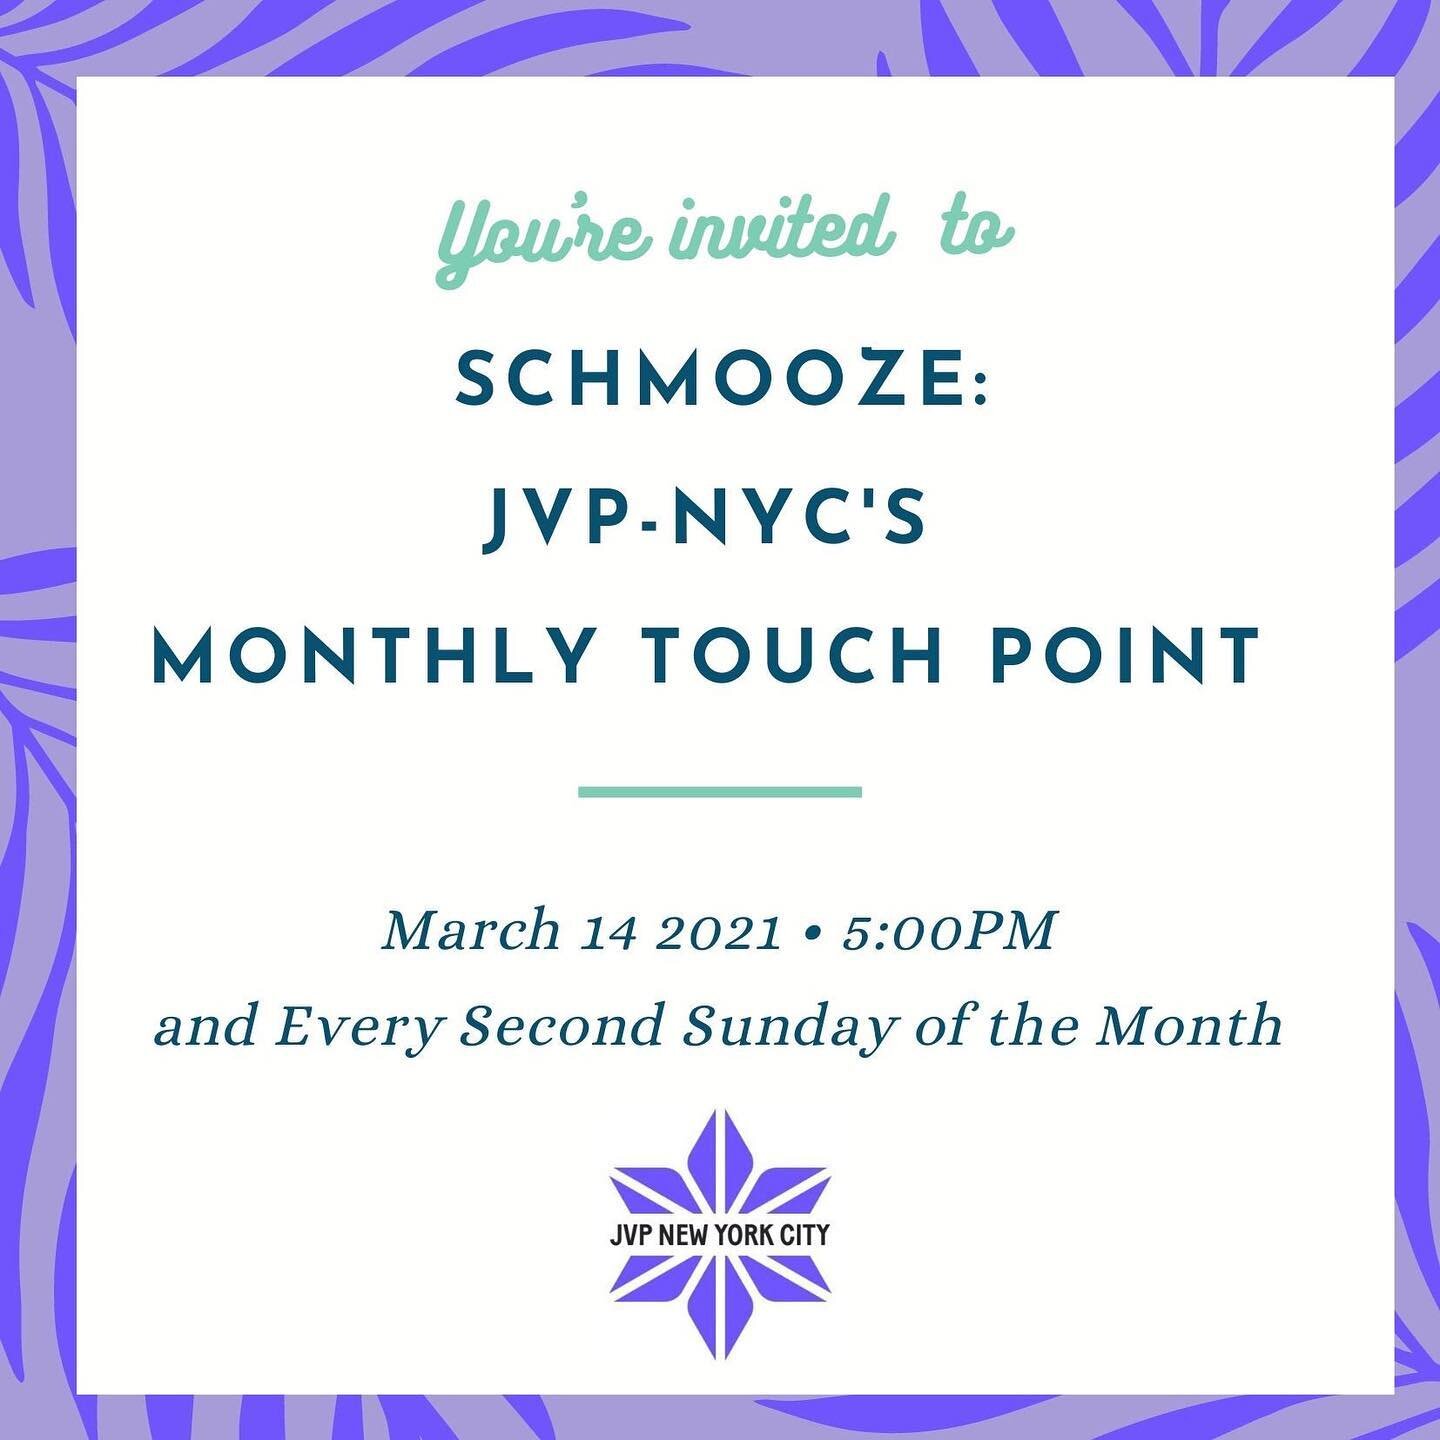 Join JVP-NYC's new monthly touch point, SCHMOOZE, starting this Sunday March 14th at 5 pm!&nbsp;This is a space for JVP-NYC members to come together, see each other, talk about what's on our minds, process current events, share announcements, discuss